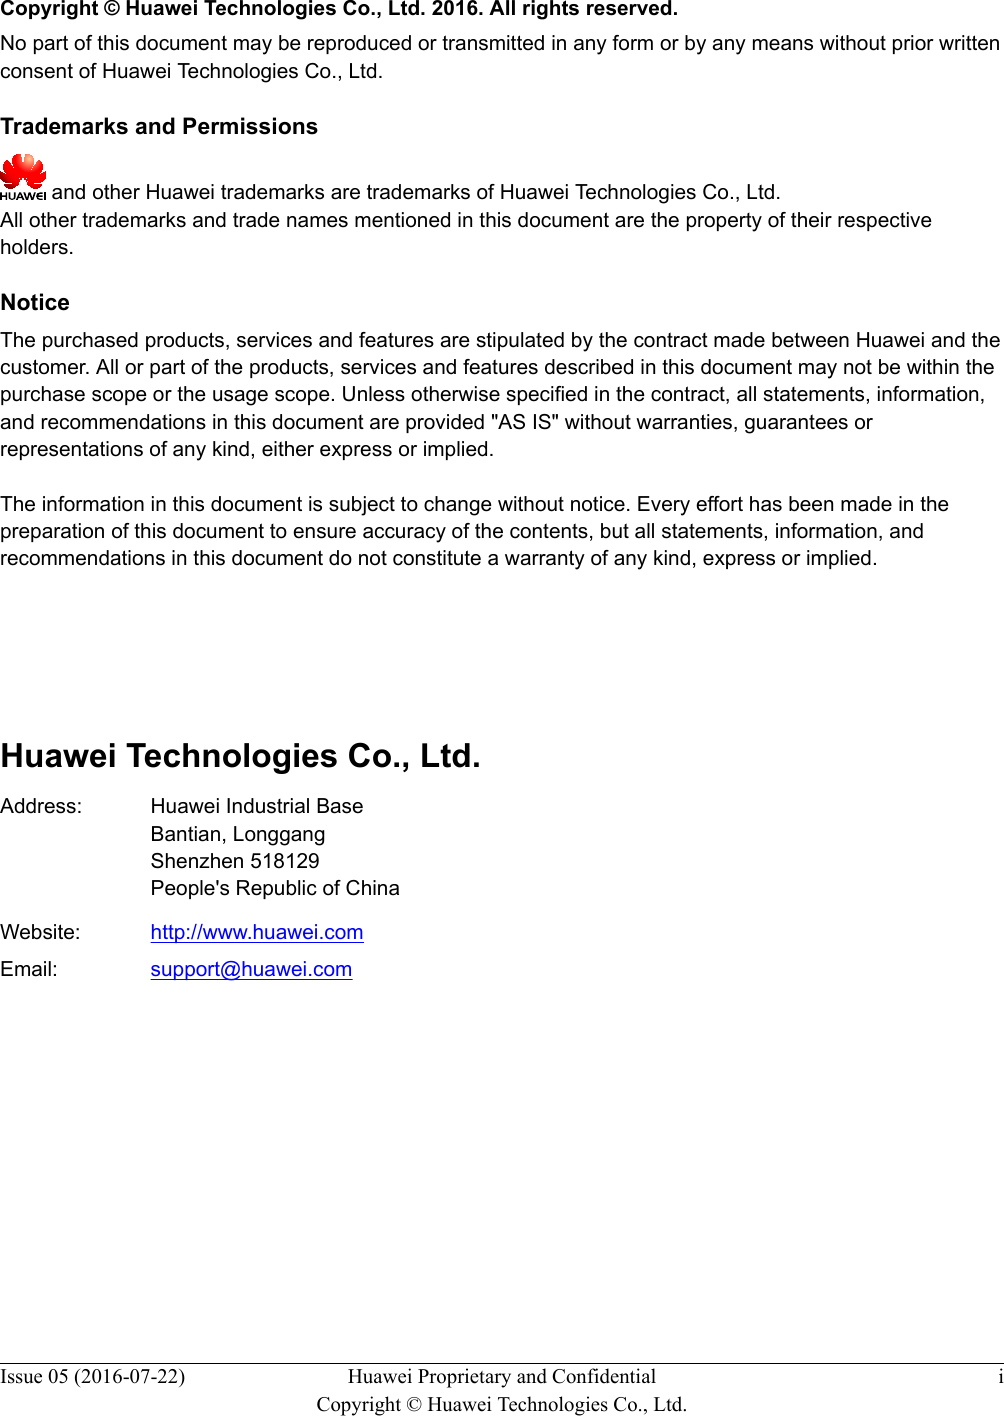   Copyright © Huawei Technologies Co., Ltd. 2016. All rights reserved.No part of this document may be reproduced or transmitted in any form or by any means without prior writtenconsent of Huawei Technologies Co., Ltd. Trademarks and Permissions and other Huawei trademarks are trademarks of Huawei Technologies Co., Ltd.All other trademarks and trade names mentioned in this document are the property of their respectiveholders. NoticeThe purchased products, services and features are stipulated by the contract made between Huawei and thecustomer. All or part of the products, services and features described in this document may not be within thepurchase scope or the usage scope. Unless otherwise specified in the contract, all statements, information,and recommendations in this document are provided &quot;AS IS&quot; without warranties, guarantees orrepresentations of any kind, either express or implied.The information in this document is subject to change without notice. Every effort has been made in thepreparation of this document to ensure accuracy of the contents, but all statements, information, andrecommendations in this document do not constitute a warranty of any kind, express or implied.        Huawei Technologies Co., Ltd.Address: Huawei Industrial BaseBantian, LonggangShenzhen 518129People&apos;s Republic of ChinaWebsite: http://www.huawei.comEmail: support@huawei.comIssue 05 (2016-07-22) Huawei Proprietary and ConfidentialCopyright © Huawei Technologies Co., Ltd.i